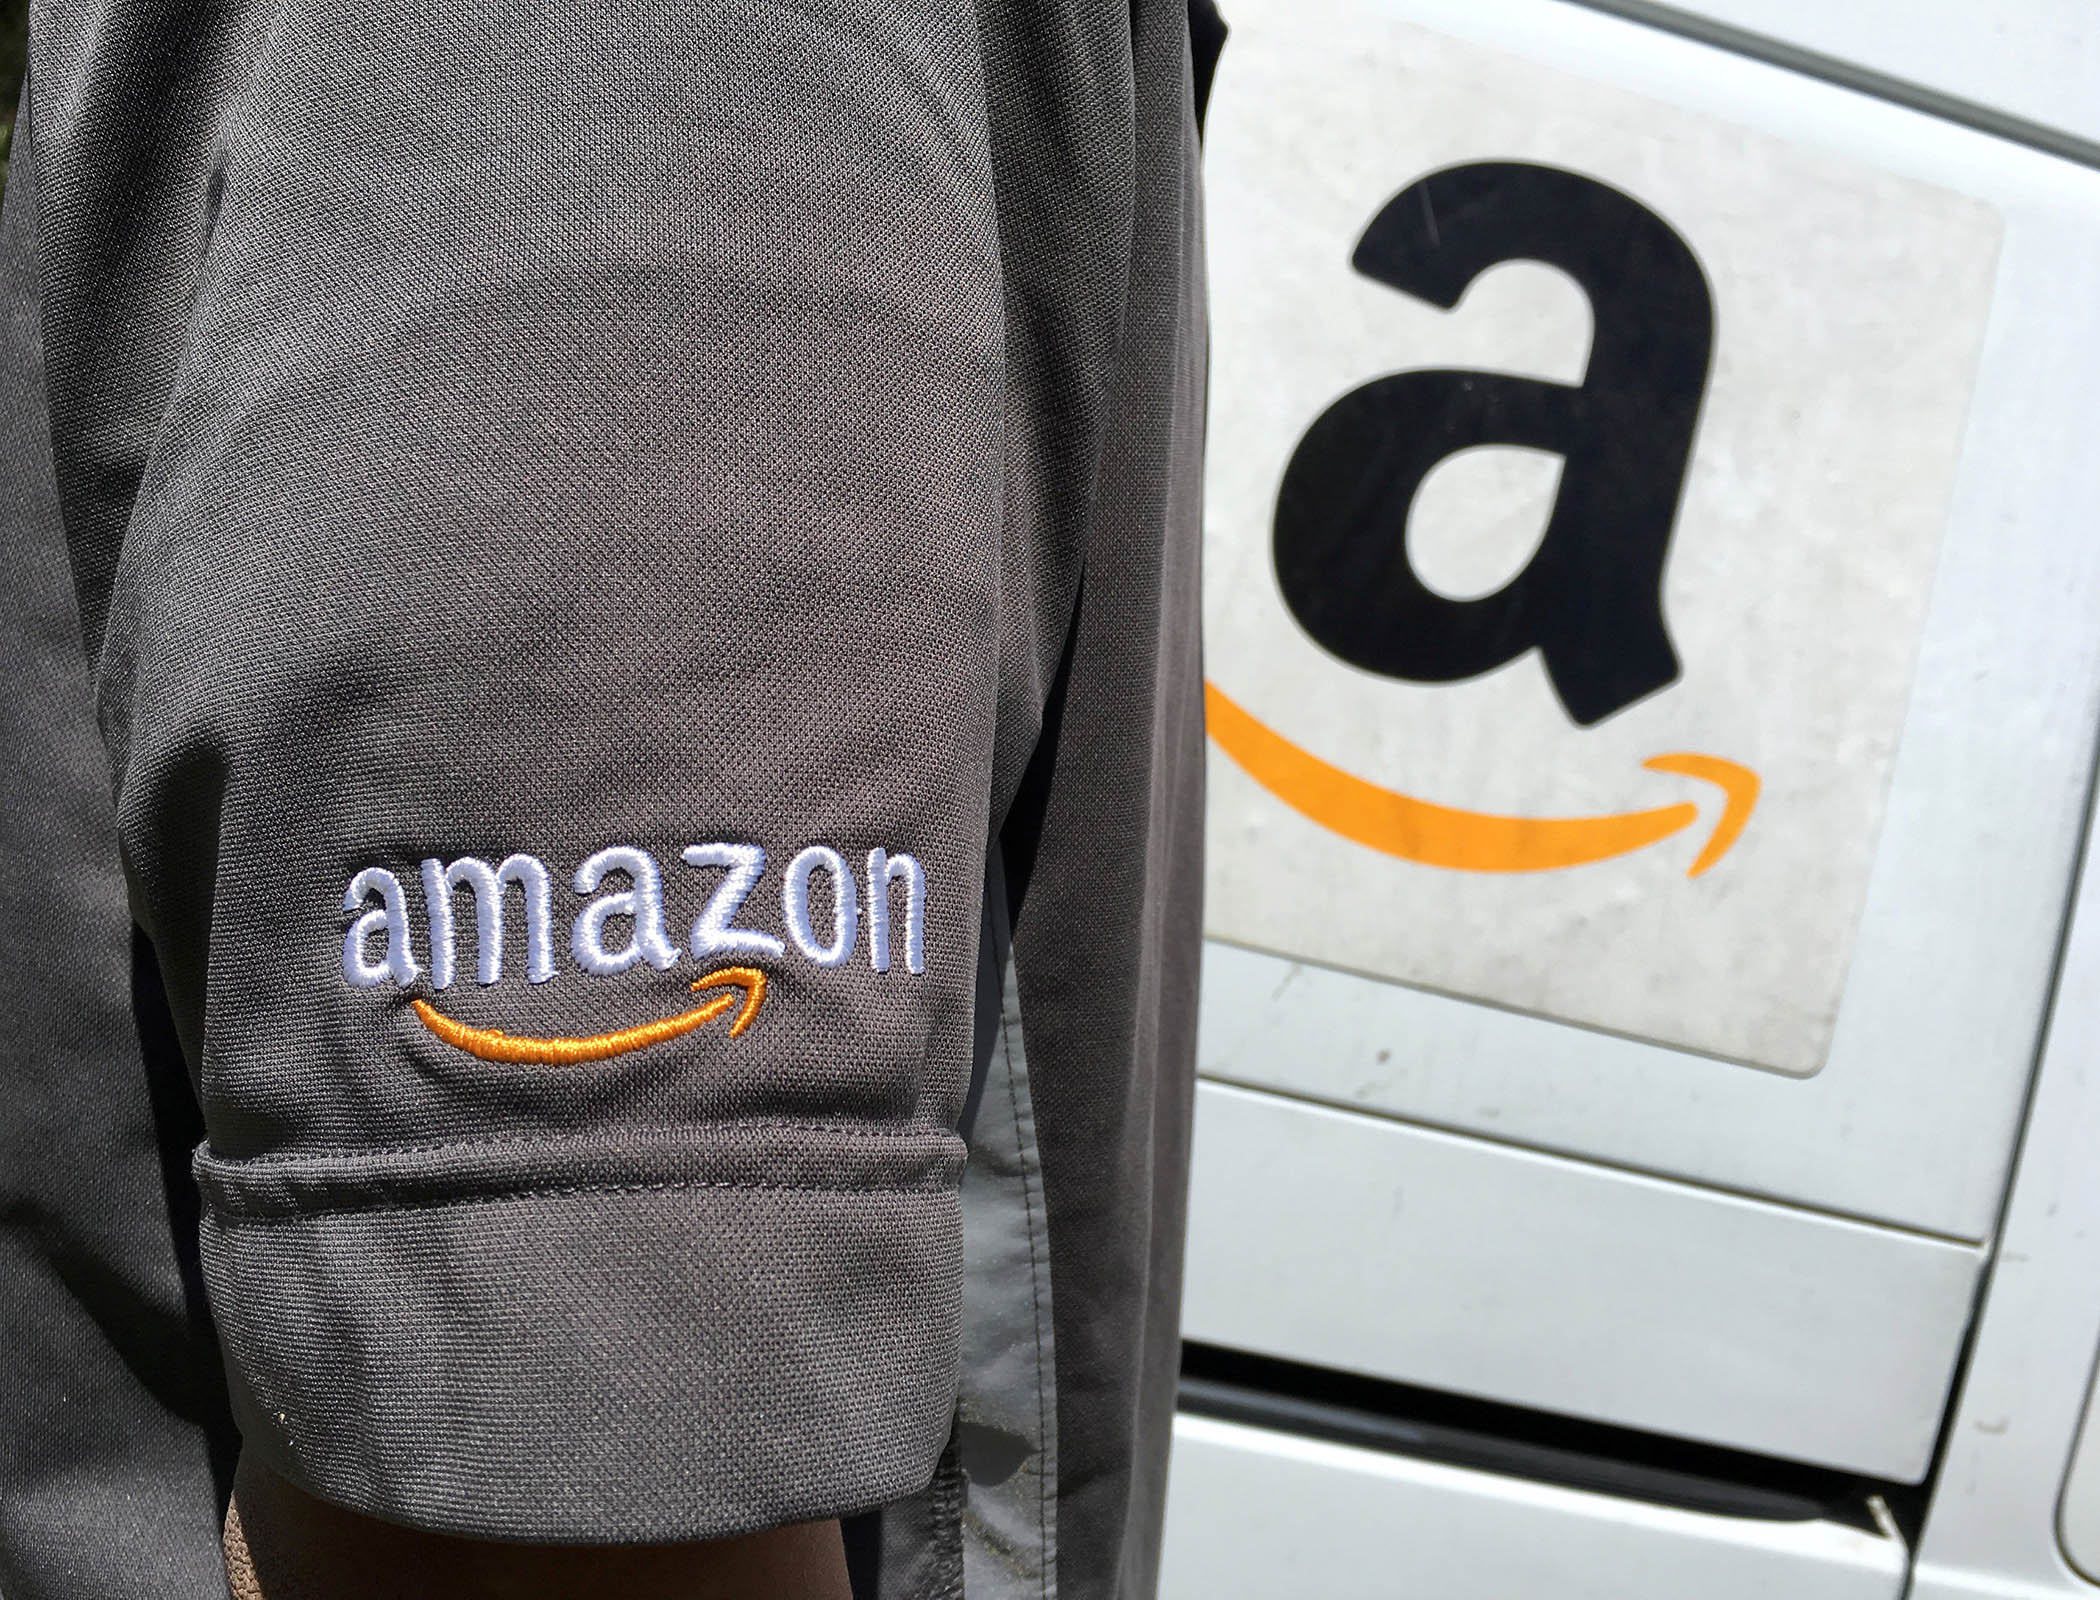 FTC and 17 states sue Amazon for illegally maintaining market dominance